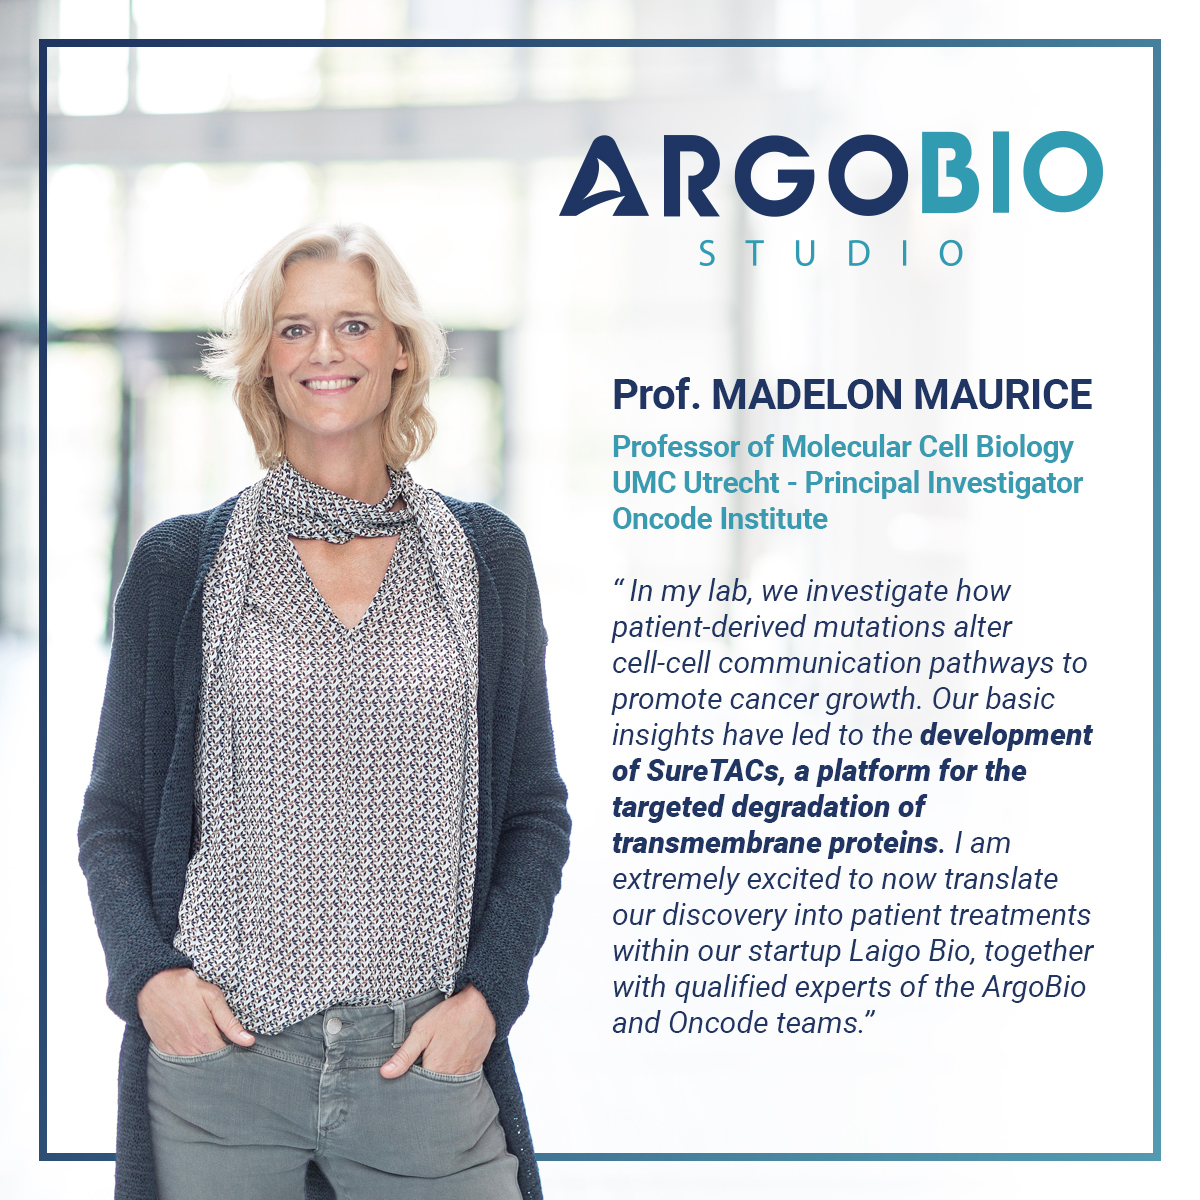 MEET OUR PARTNER Prof. @MadelonMaurice has developed an innovative approach to protein degradation,SuReTAC, that led to #LaigoBio launch with @UMCUtrecht and @oncodeinstitute. 
argobiostudio.com
#Protac #membraneprotein #bispecificantibody #antibody #Proteindegrader #cancer